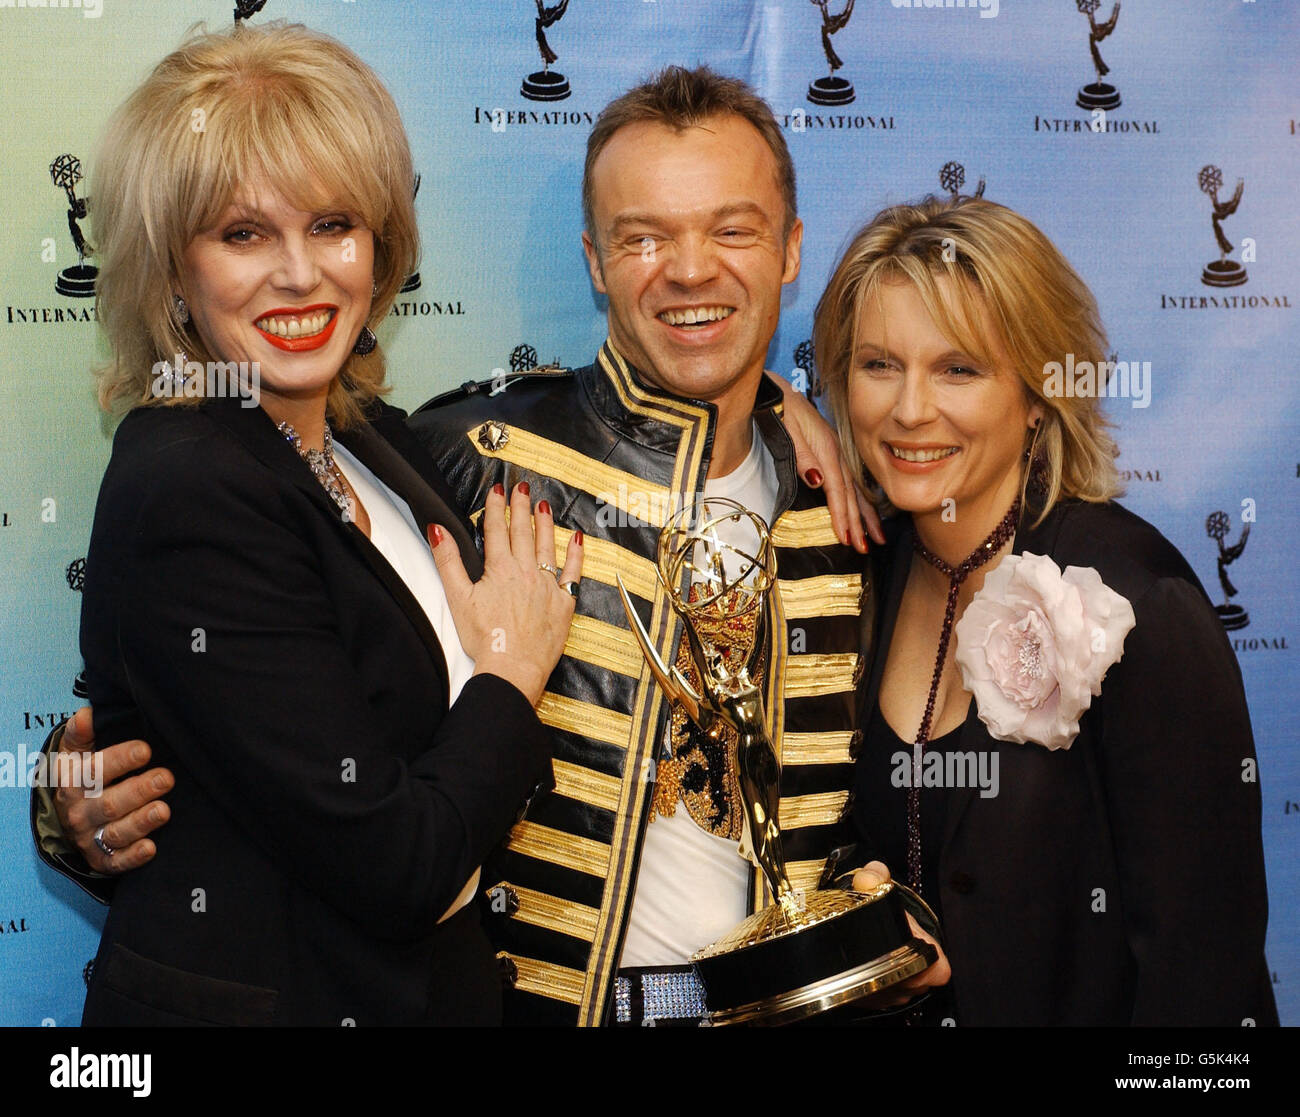 British actresses Joanna Lumley (L) and Jennifer Saunders (R), stars of 'Absolutely Fabulous' pose with British talk show host Graham Norton, at the 29th International Emmy Awards, in New York City. *...Norton won the Popular Arts category with his Channel 4 show, 'So Graham Norton-Show 18'. Lumley and Saunders were presenters during the event. lllll Stock Photo